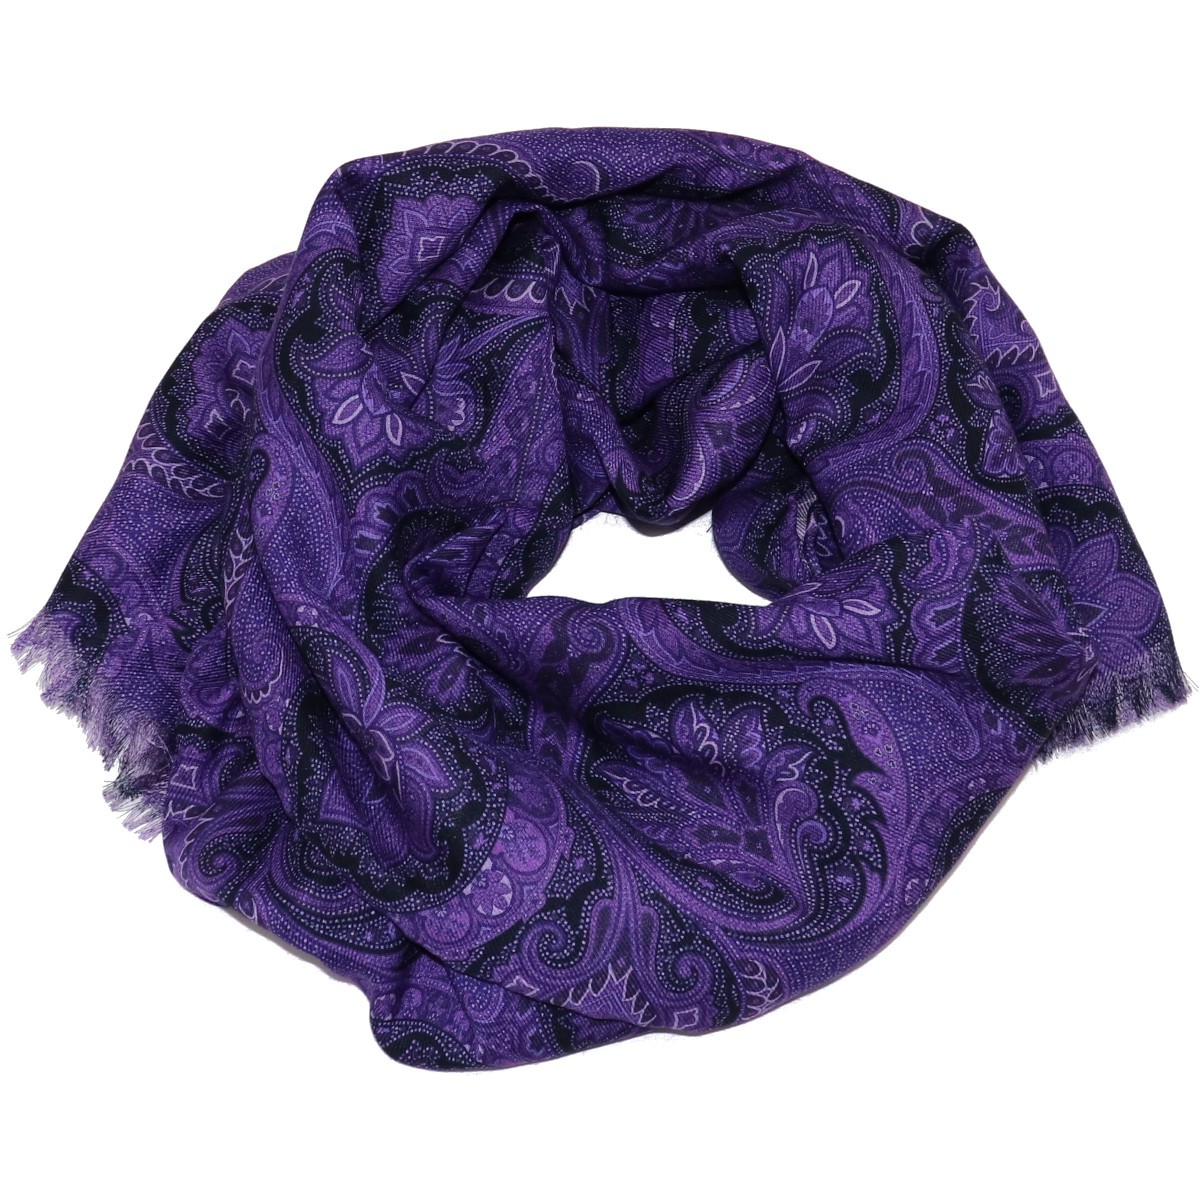 Sartorial Fringed Scarf, Cashmere and Silk, Purple and Black, Made in Italy